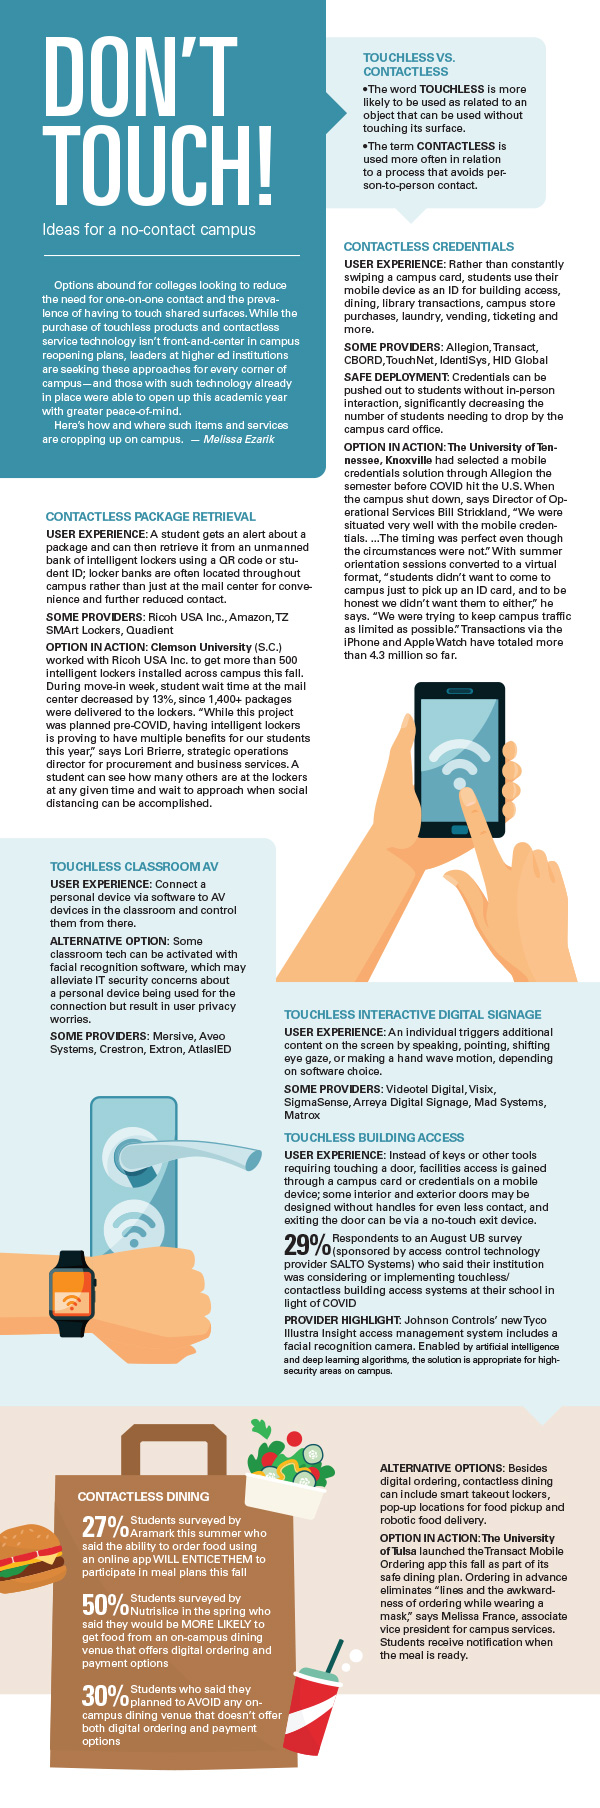 Infographic of contactless and touchless options